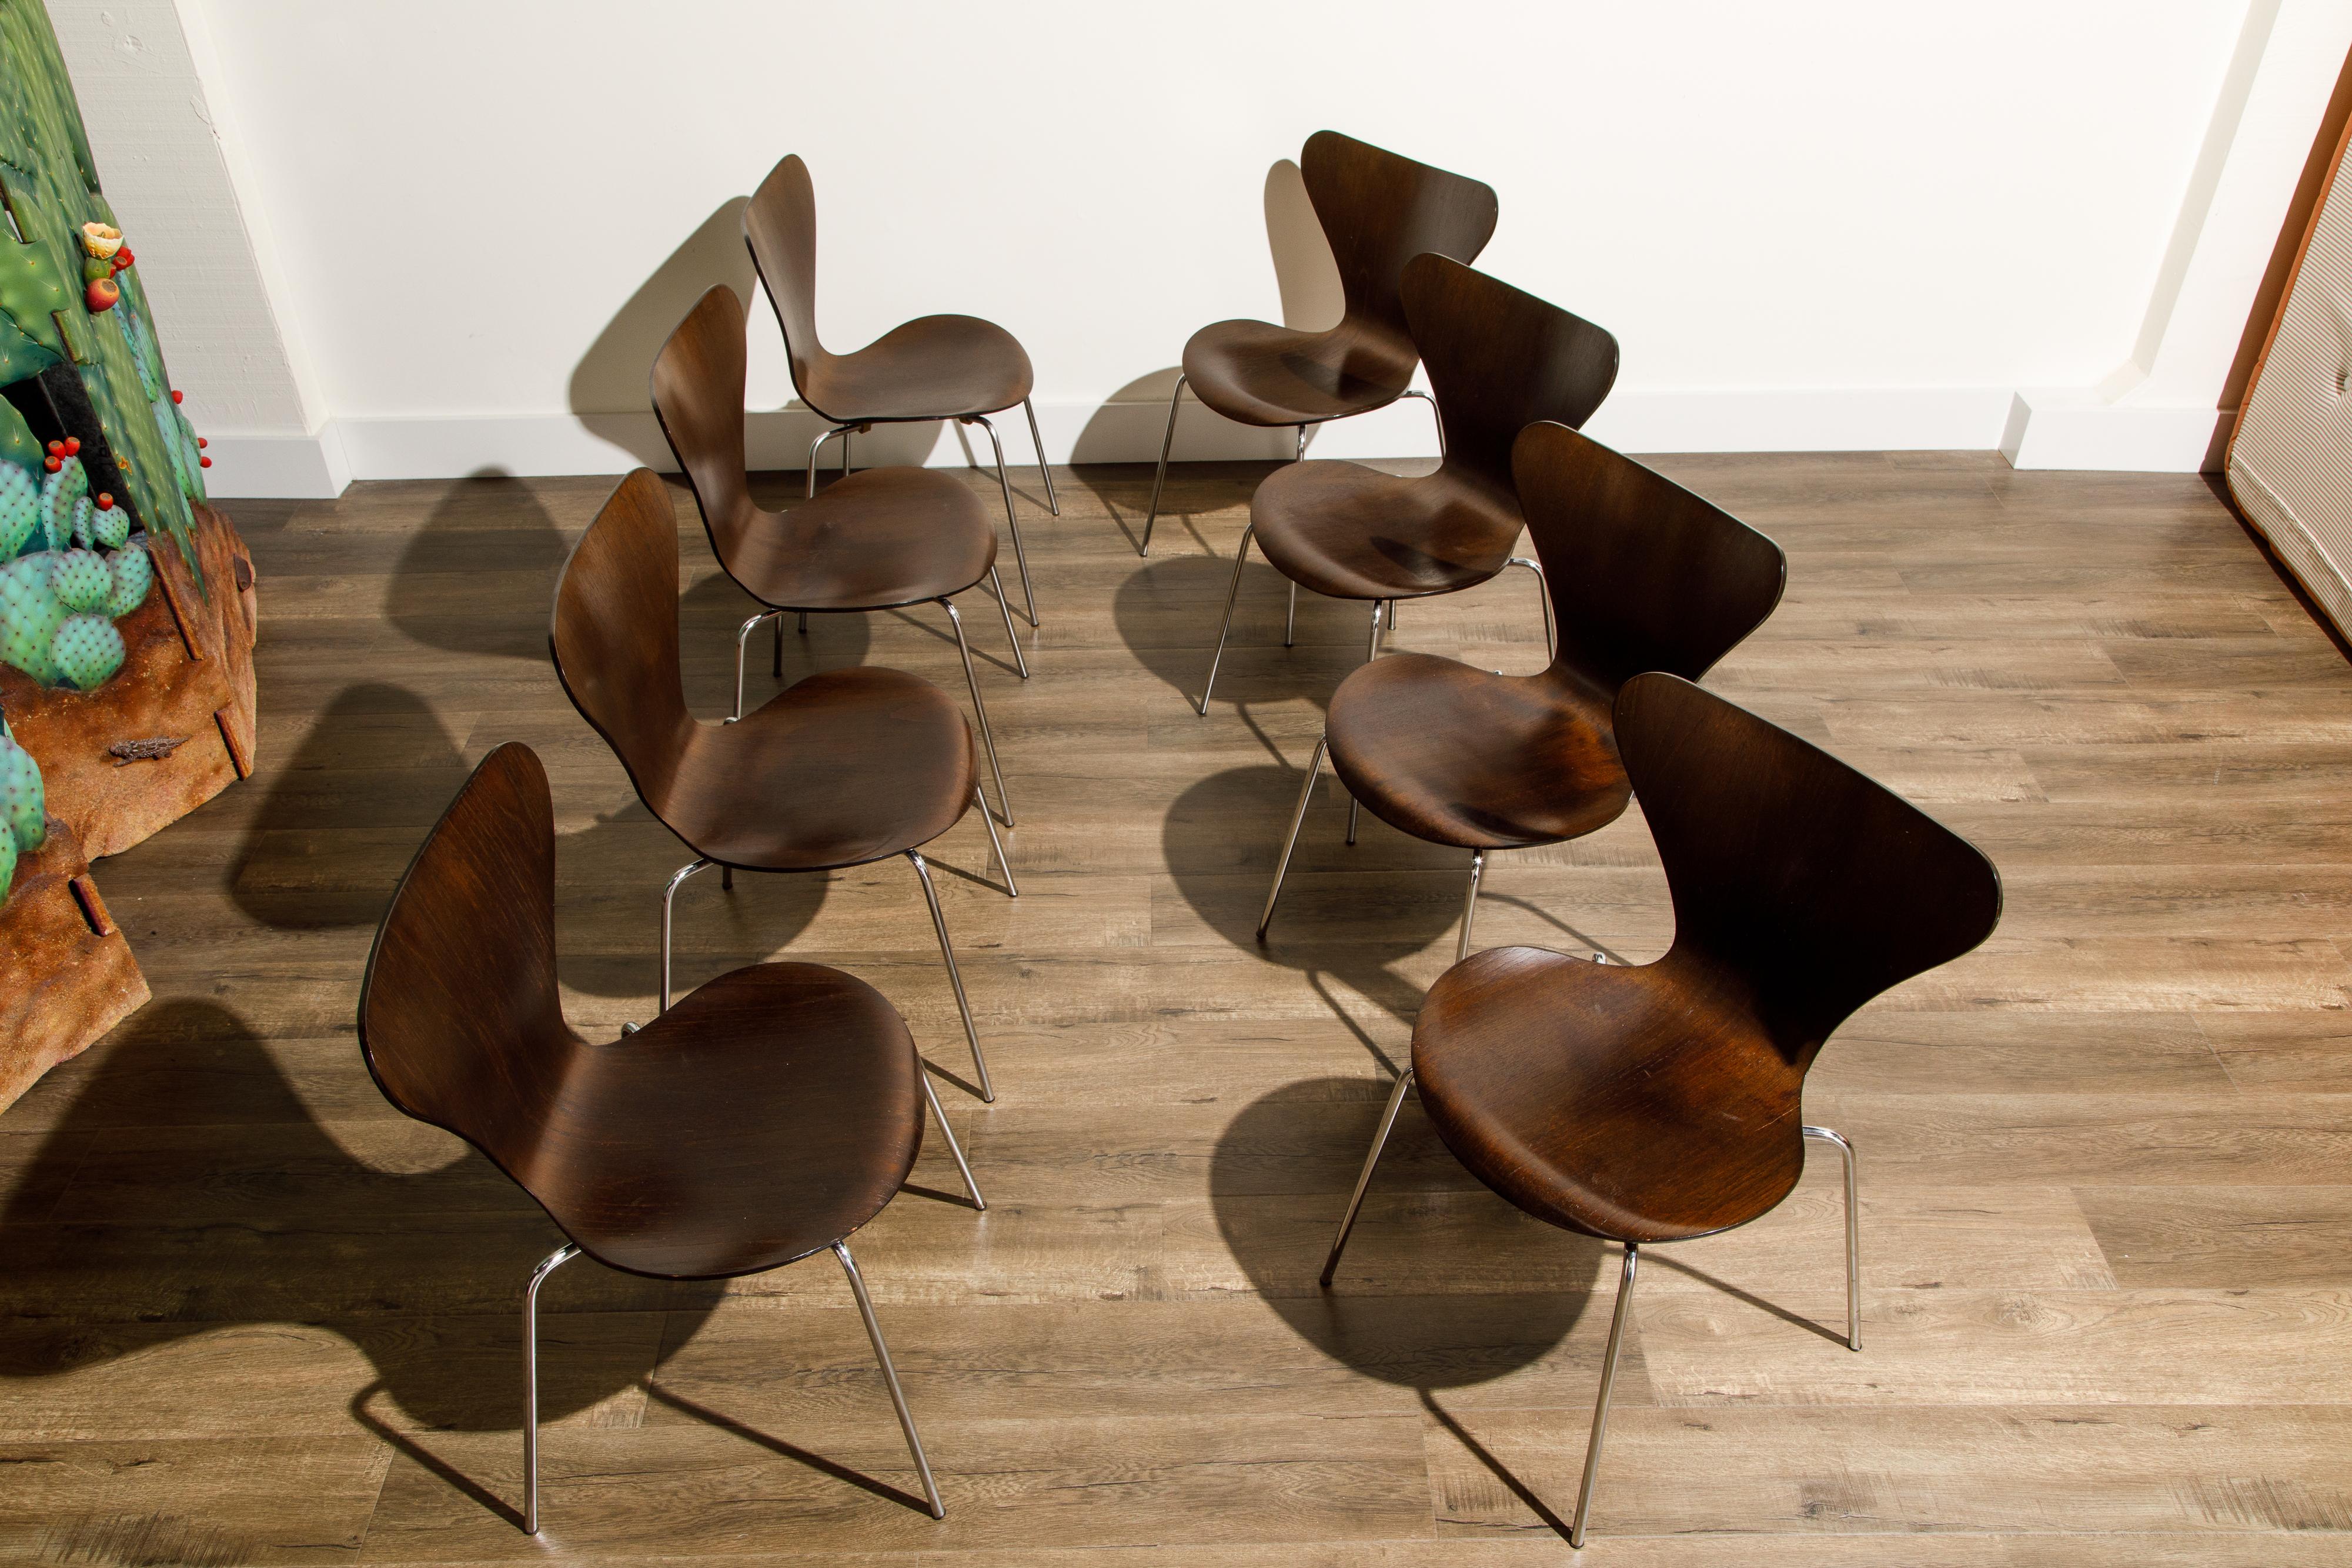 Stained Set of Eight Arne Jacobsen for Fritz Hansen 'Series-7' Chairs, c. 1973, Signed 